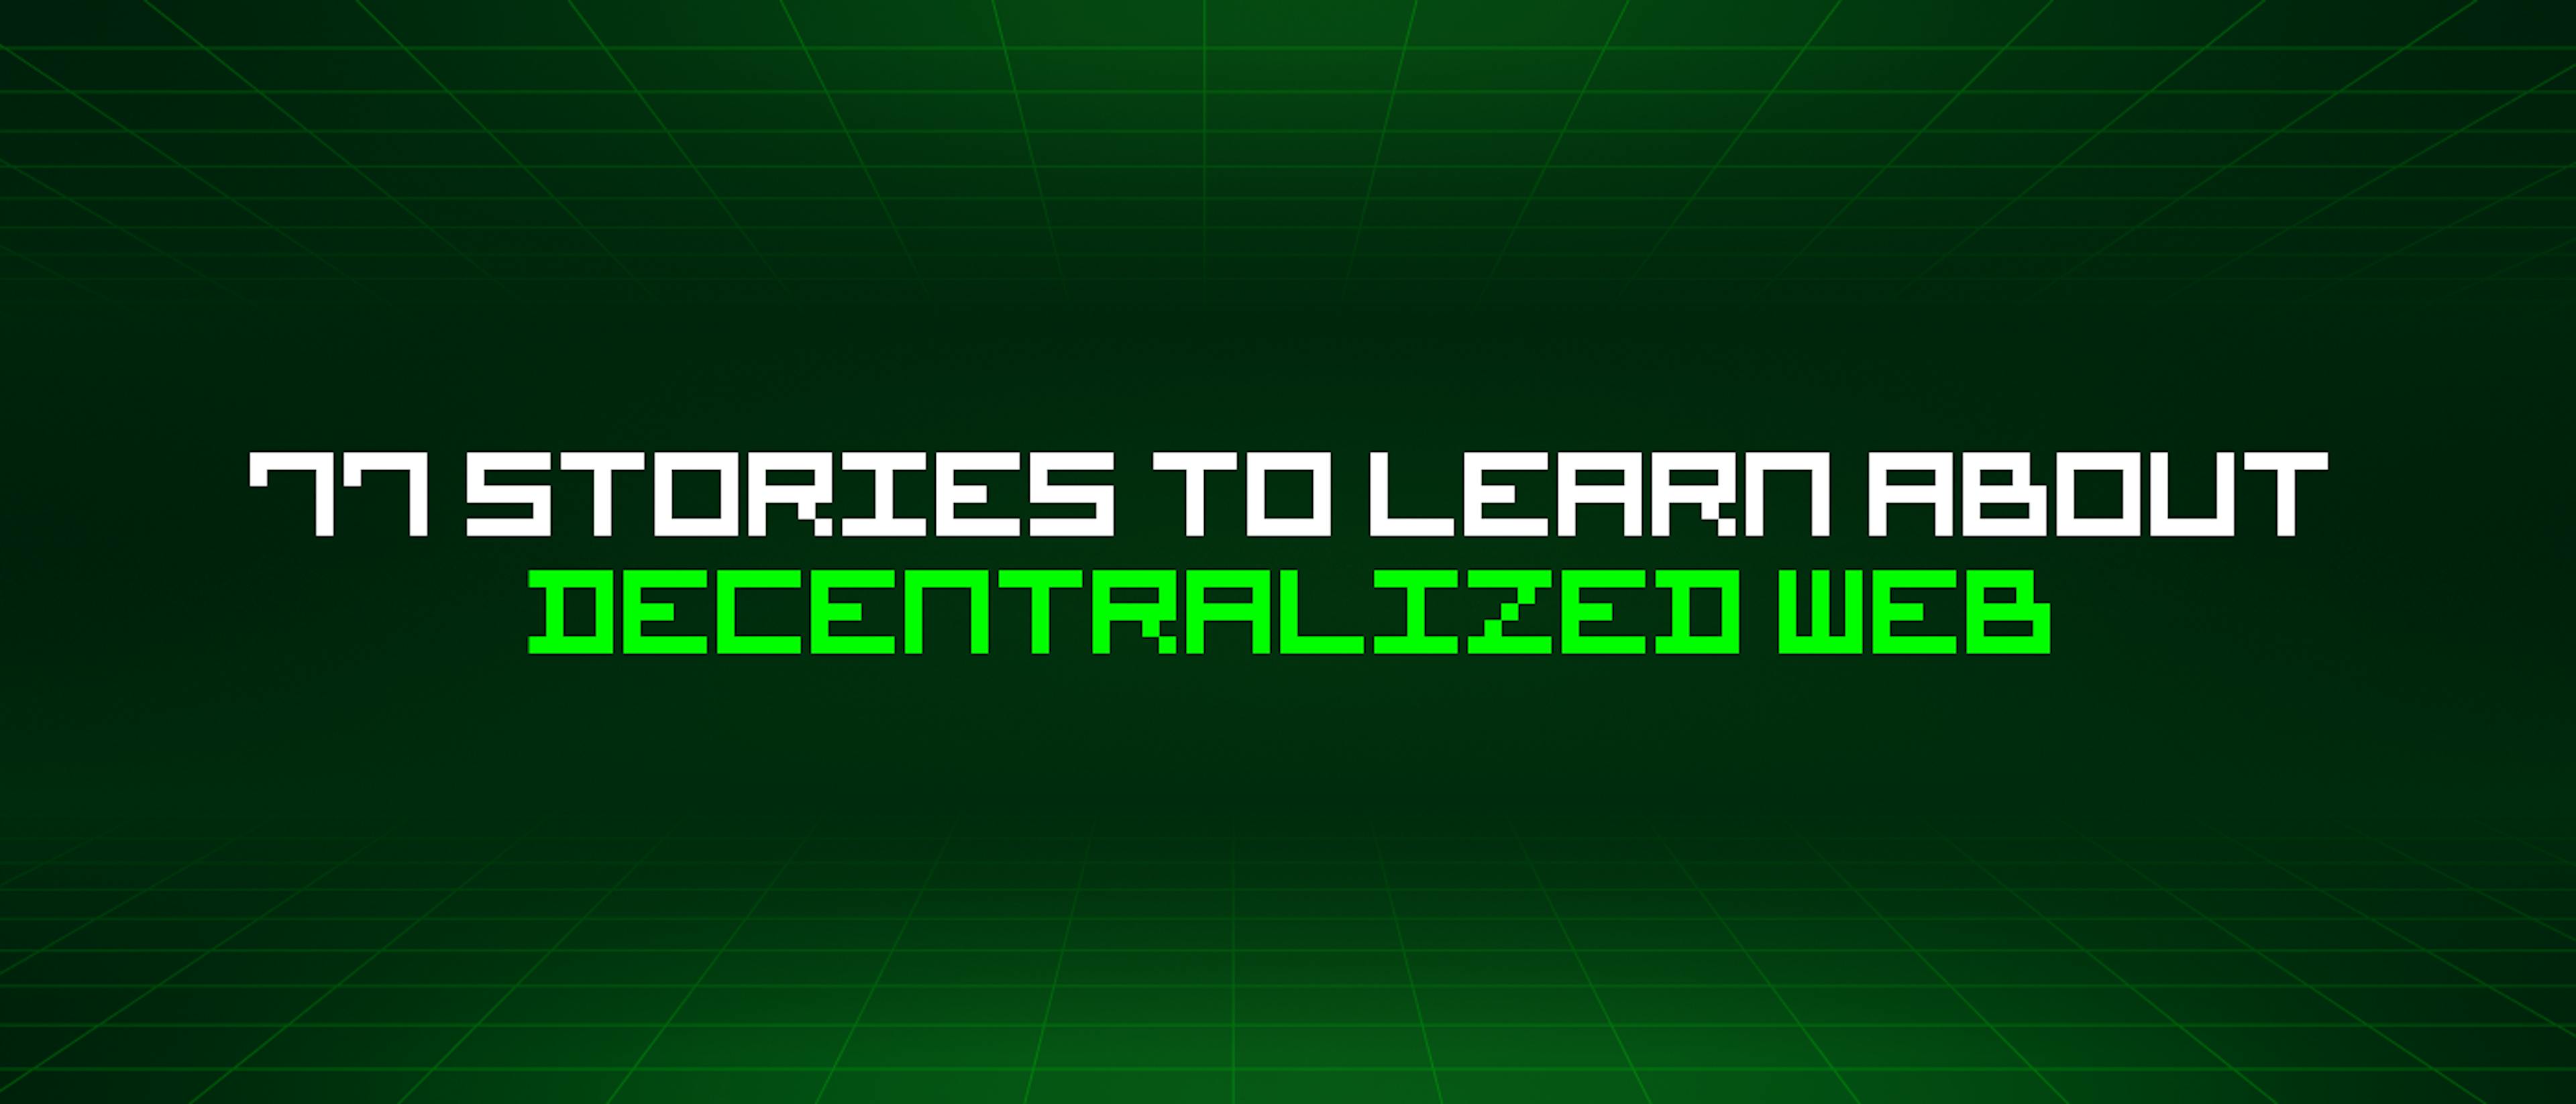 featured image - 77 Stories To Learn About Decentralized Web